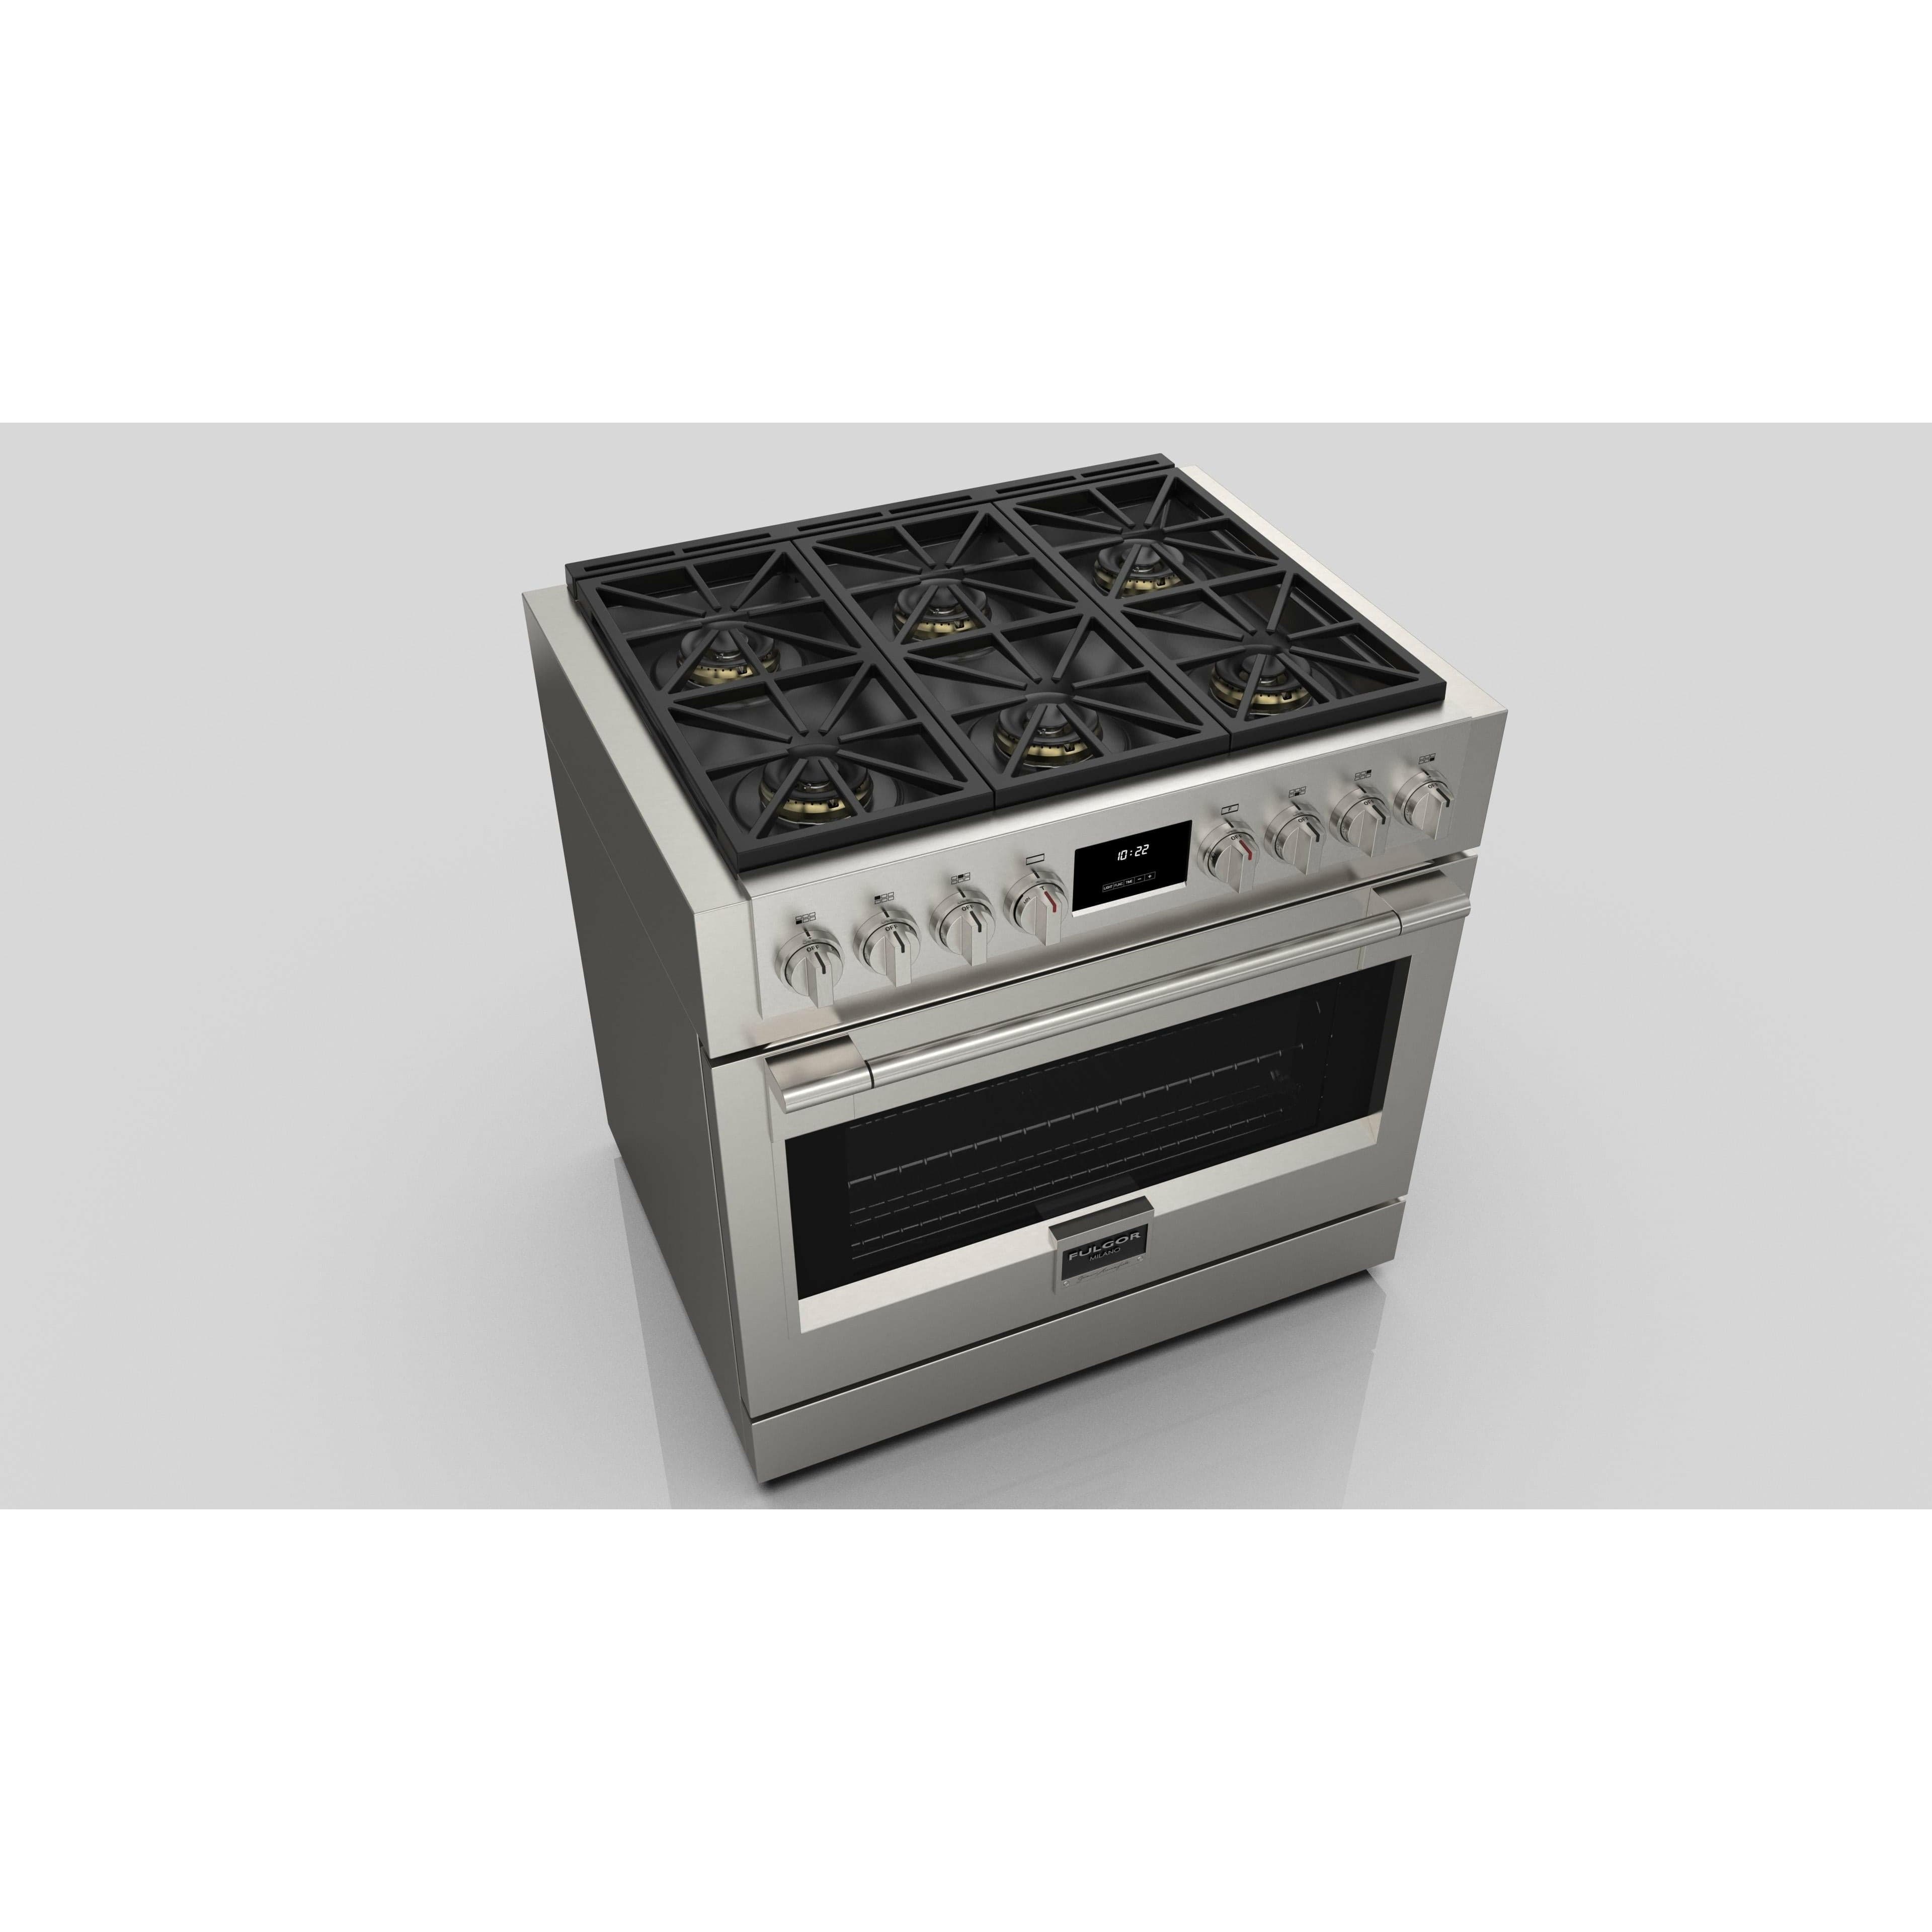 Fulgor Milano Package - 36" Gas Range, 36" French Door Refrigerator, 24" Built-In Dishwasher and 36" Wall Mount Hood Ranges F6PGR366S2F6FBM36S2 Luxury Appliances Direct